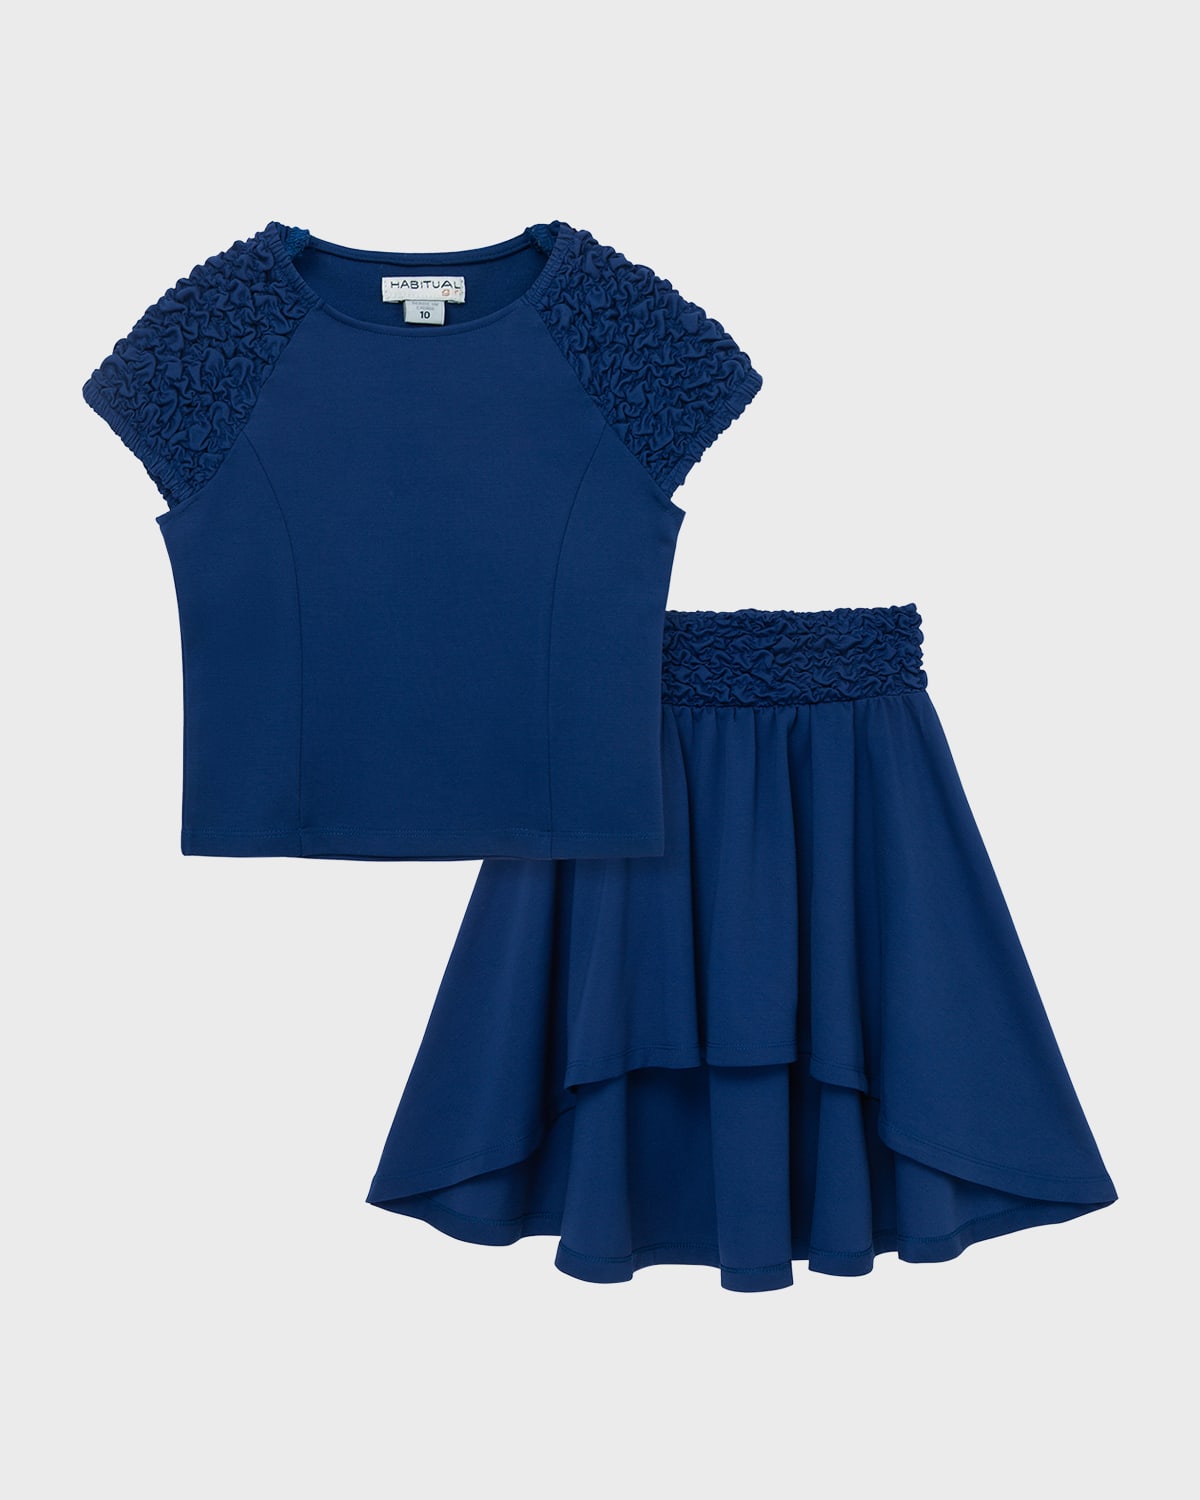 Girl's Textured High-Low Skirt Set, Size 7-16